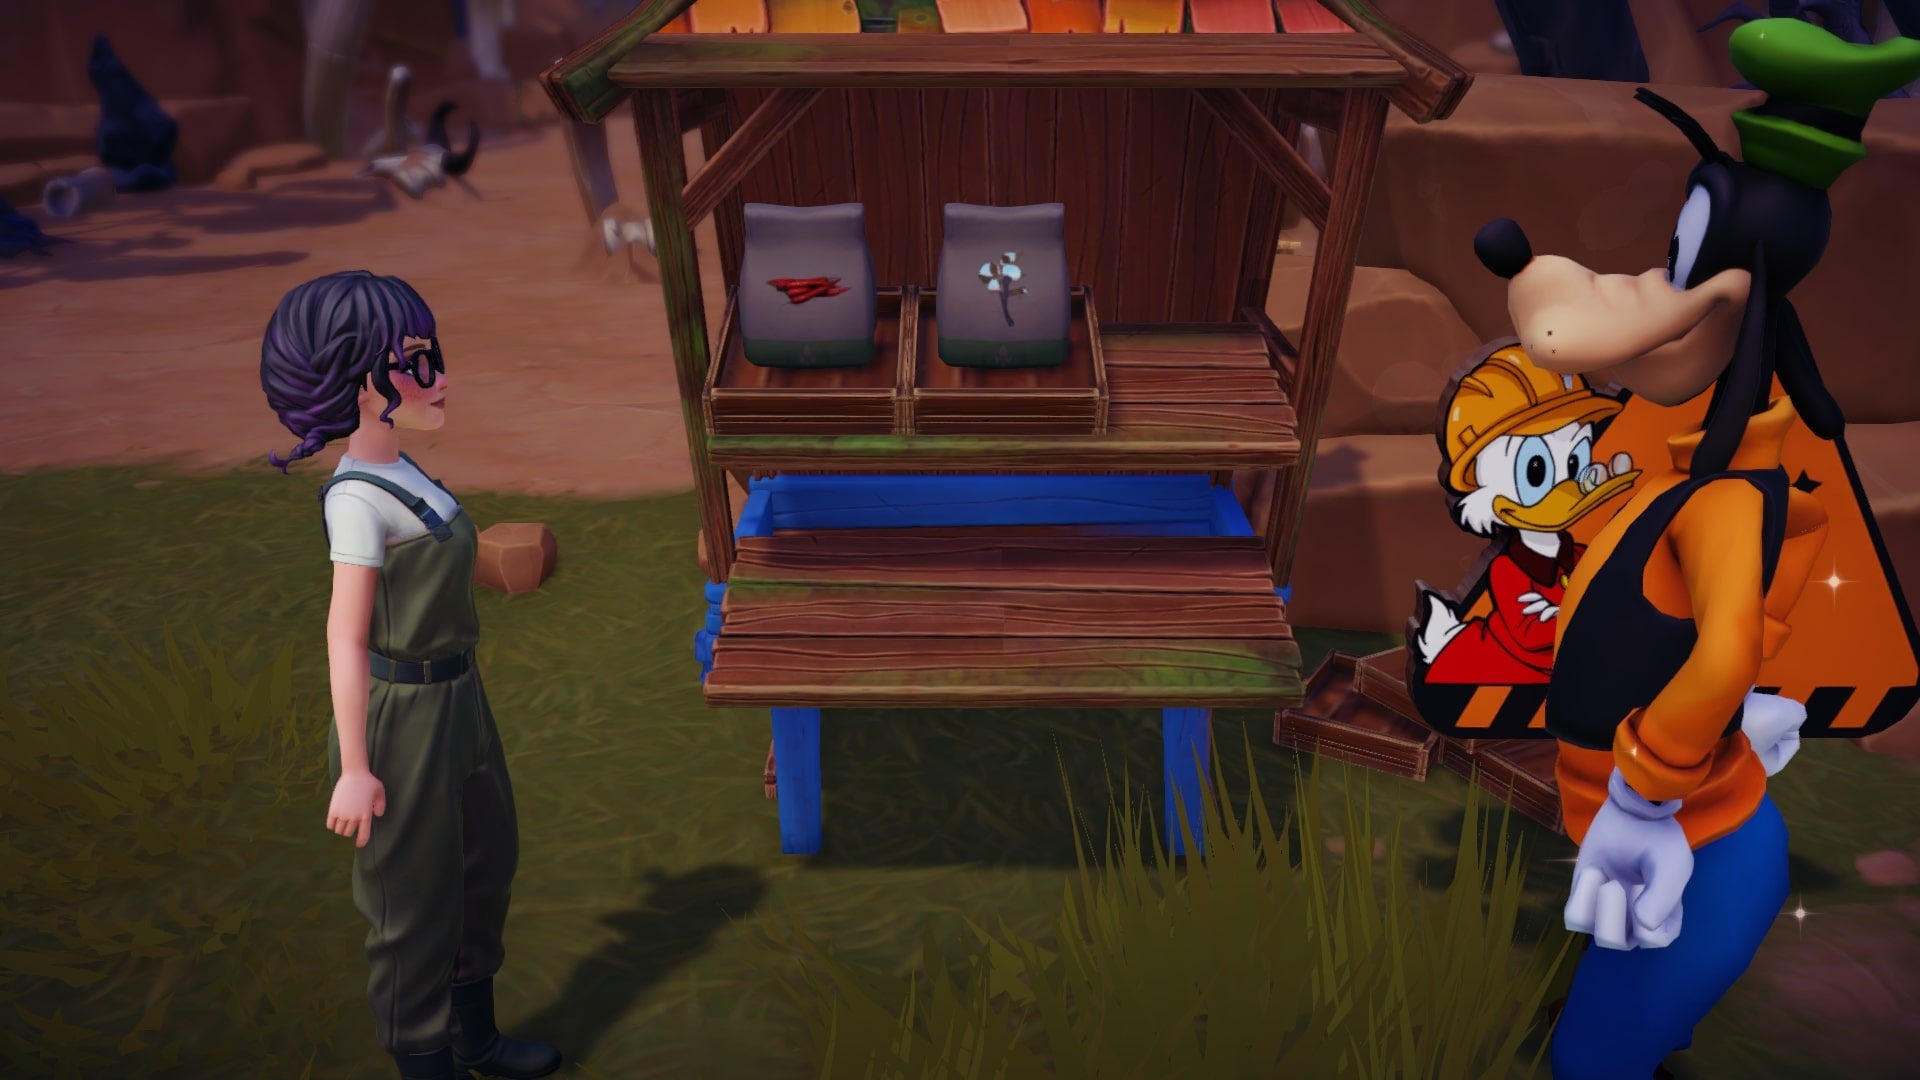 A player buys cotton seeds from Goofy's Sunlit Plateau stall in Disney Dreamlight Valley